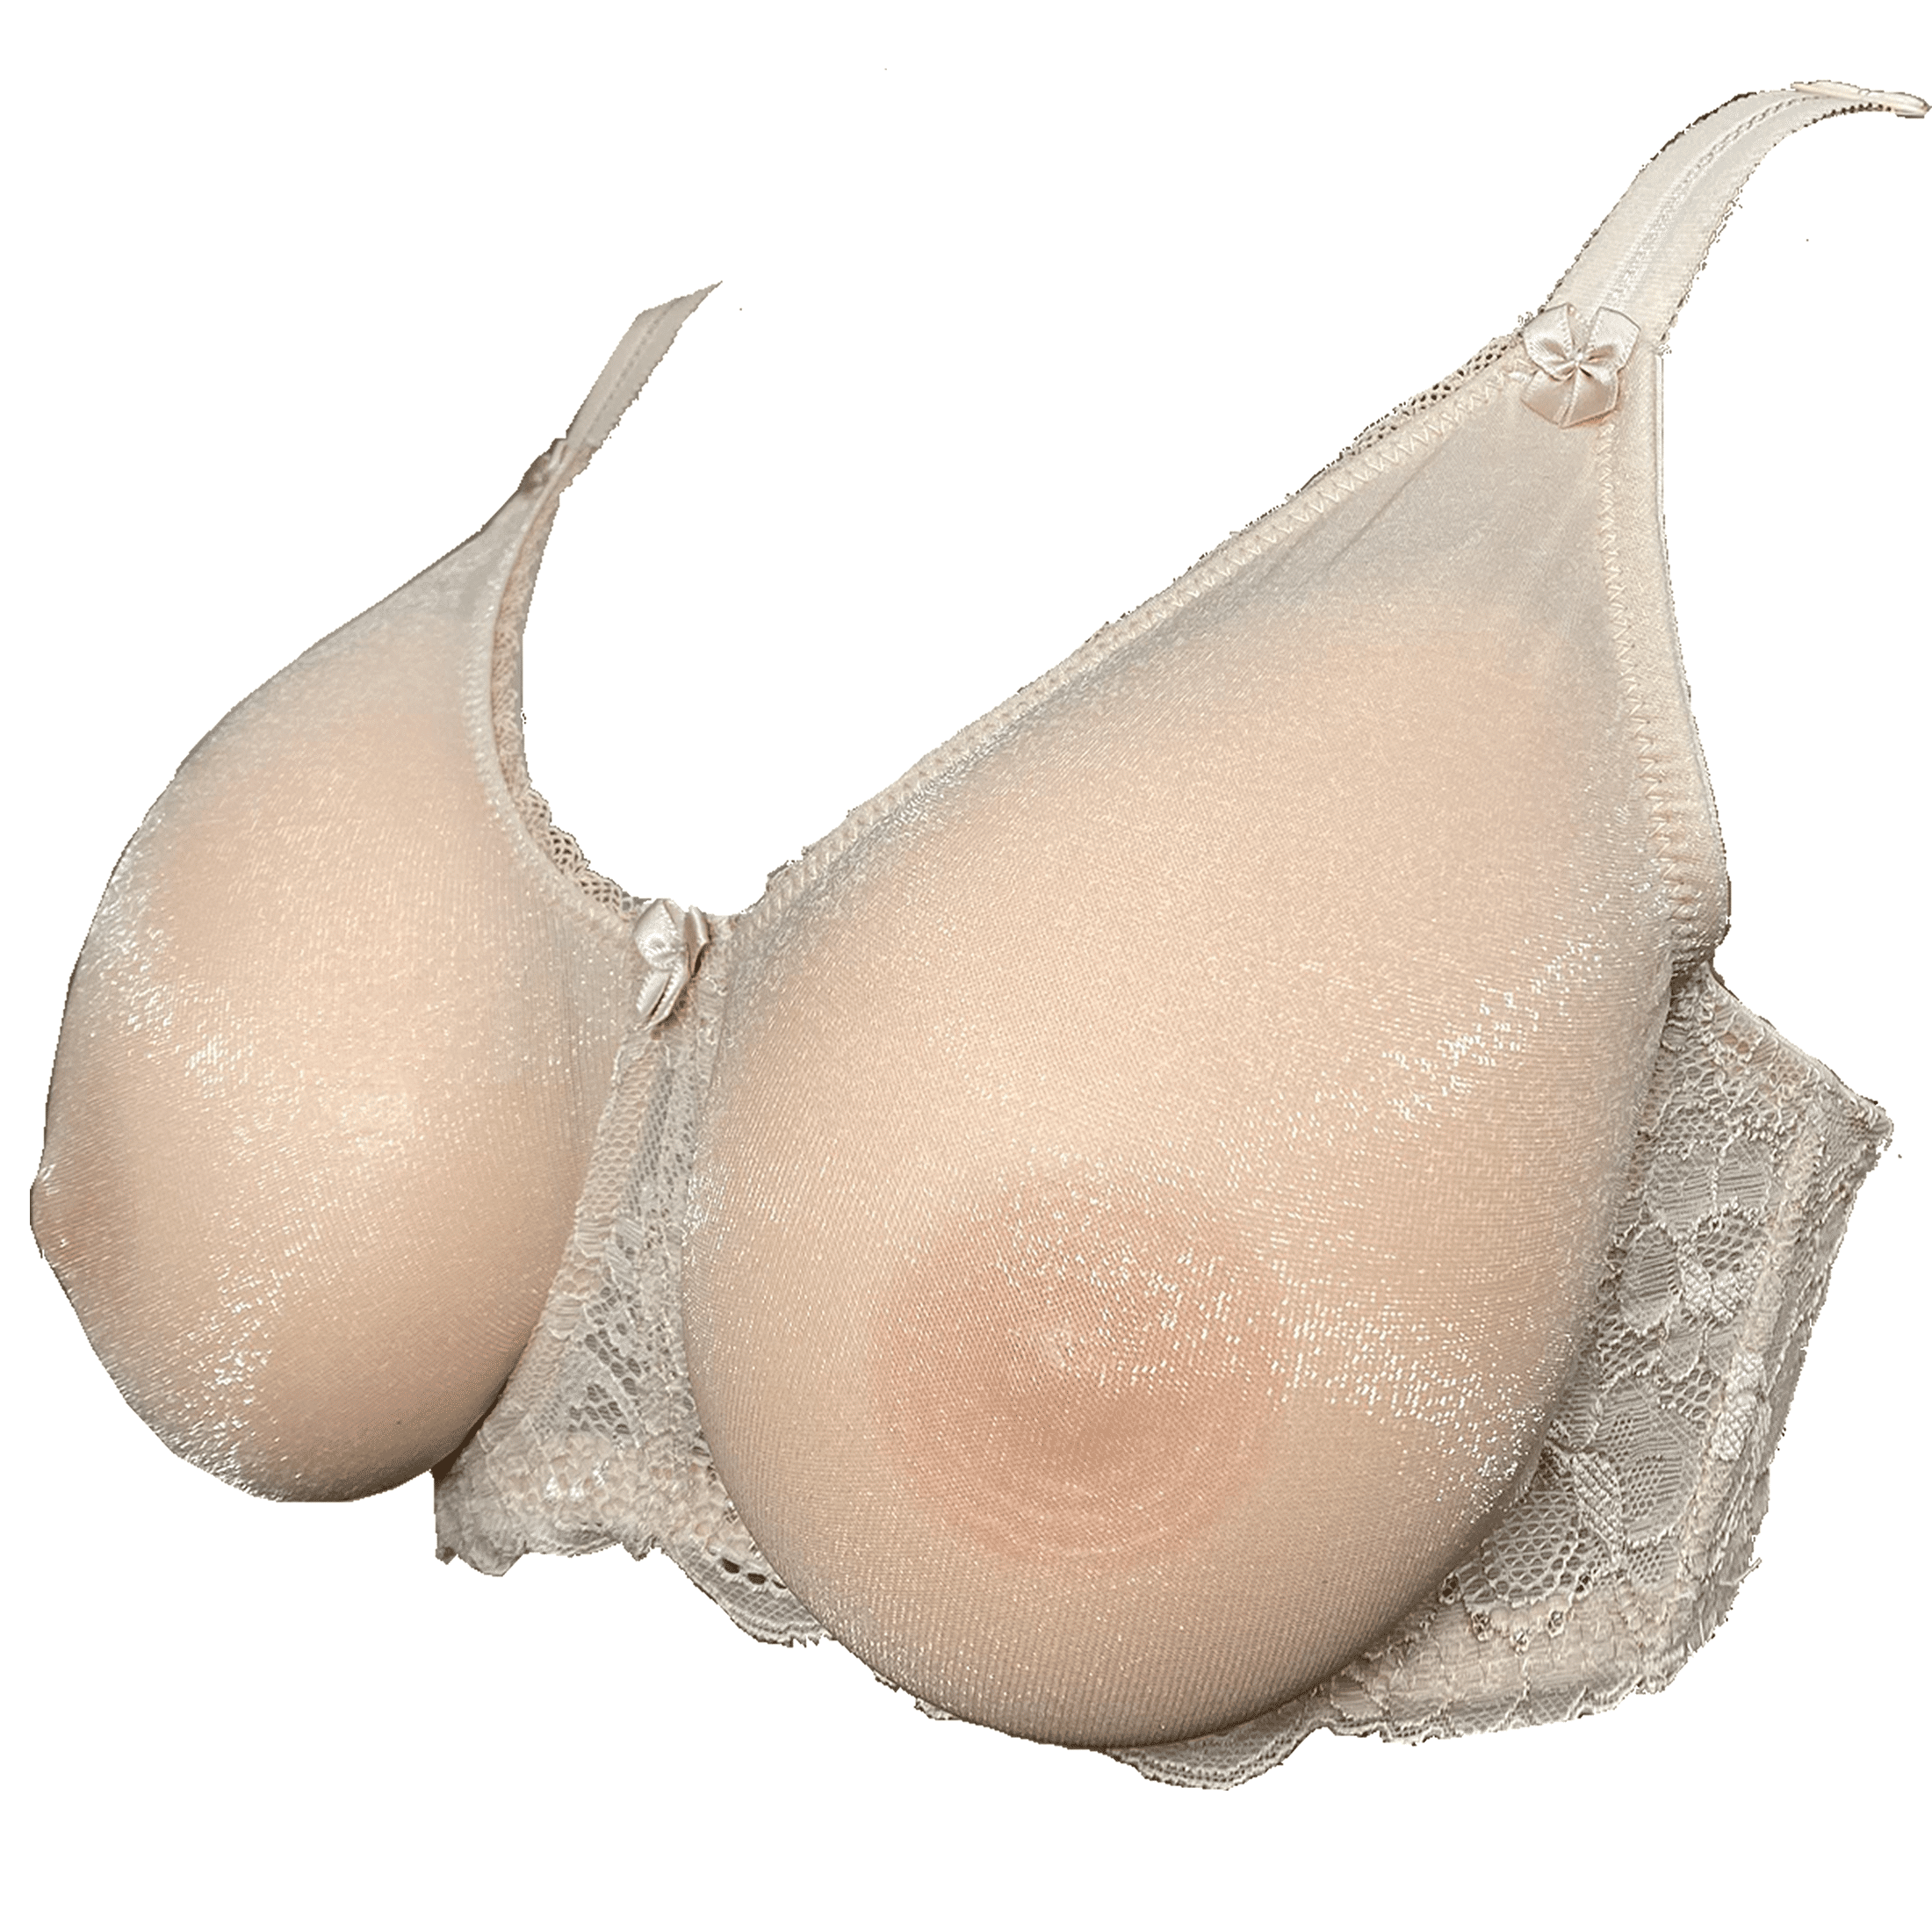 Artificial 38B Mastectomy Silicone Breast Prosthesis at Rs 4500